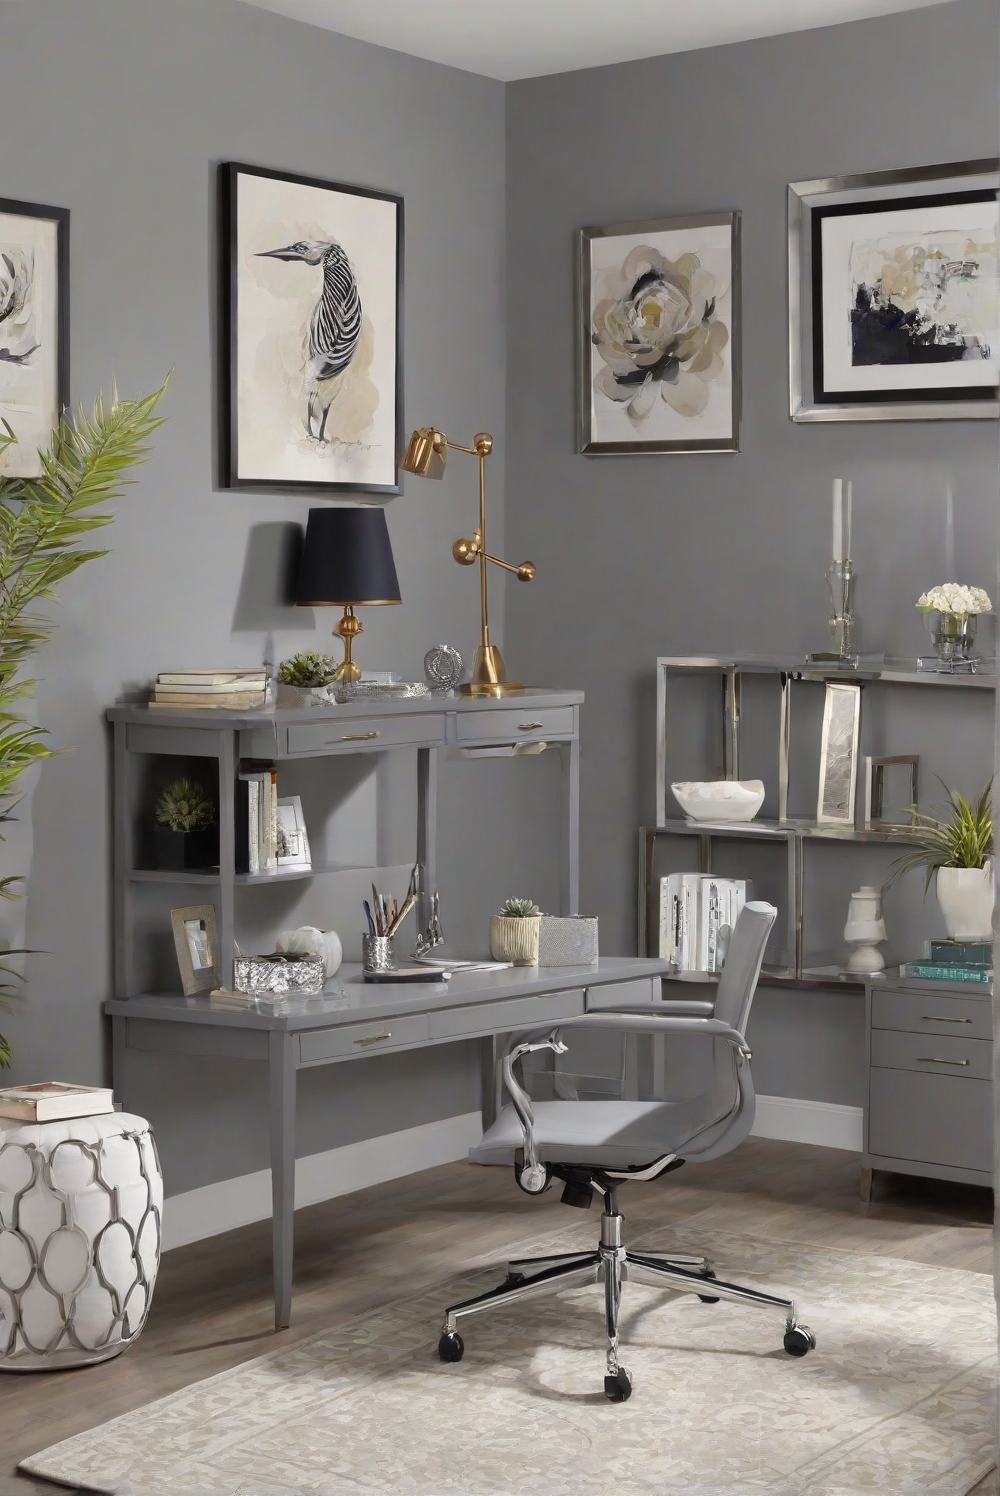 Zen workspace, mindful gray, neutral color palette, interior design inspiration, calming office decor, peaceful home office, soothing color scheme